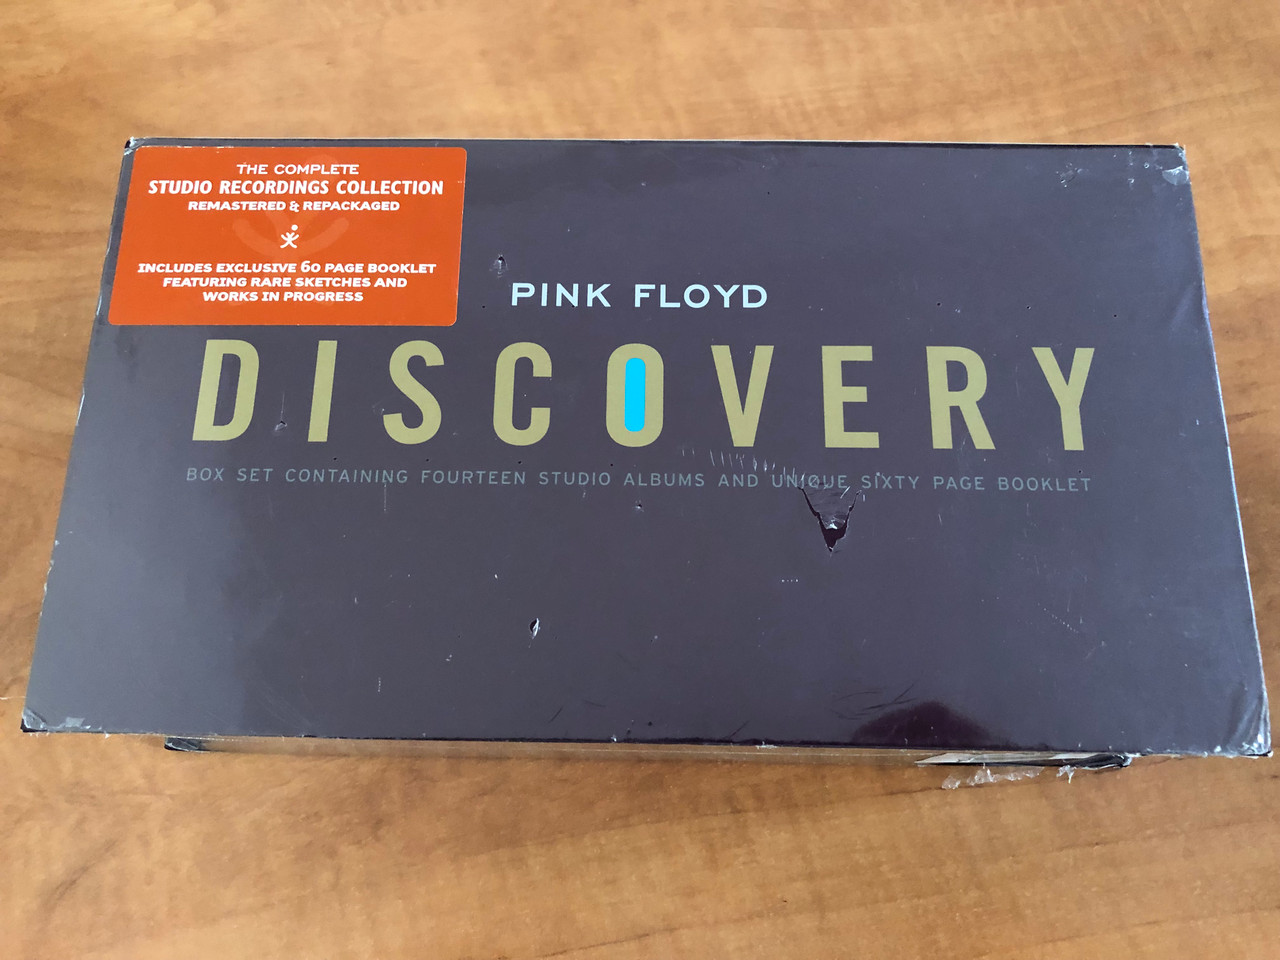 Pink Floyd – Discovery / Box Set Containing Fourteen Studio Albums And  Unique Sixty Page Booklet / The Complete Studio Recordings Collection,  Remastered & Repackaged / EMI 16x Audio CD 2011, Box Set / 5099908261328 -  bibleinmylanguage